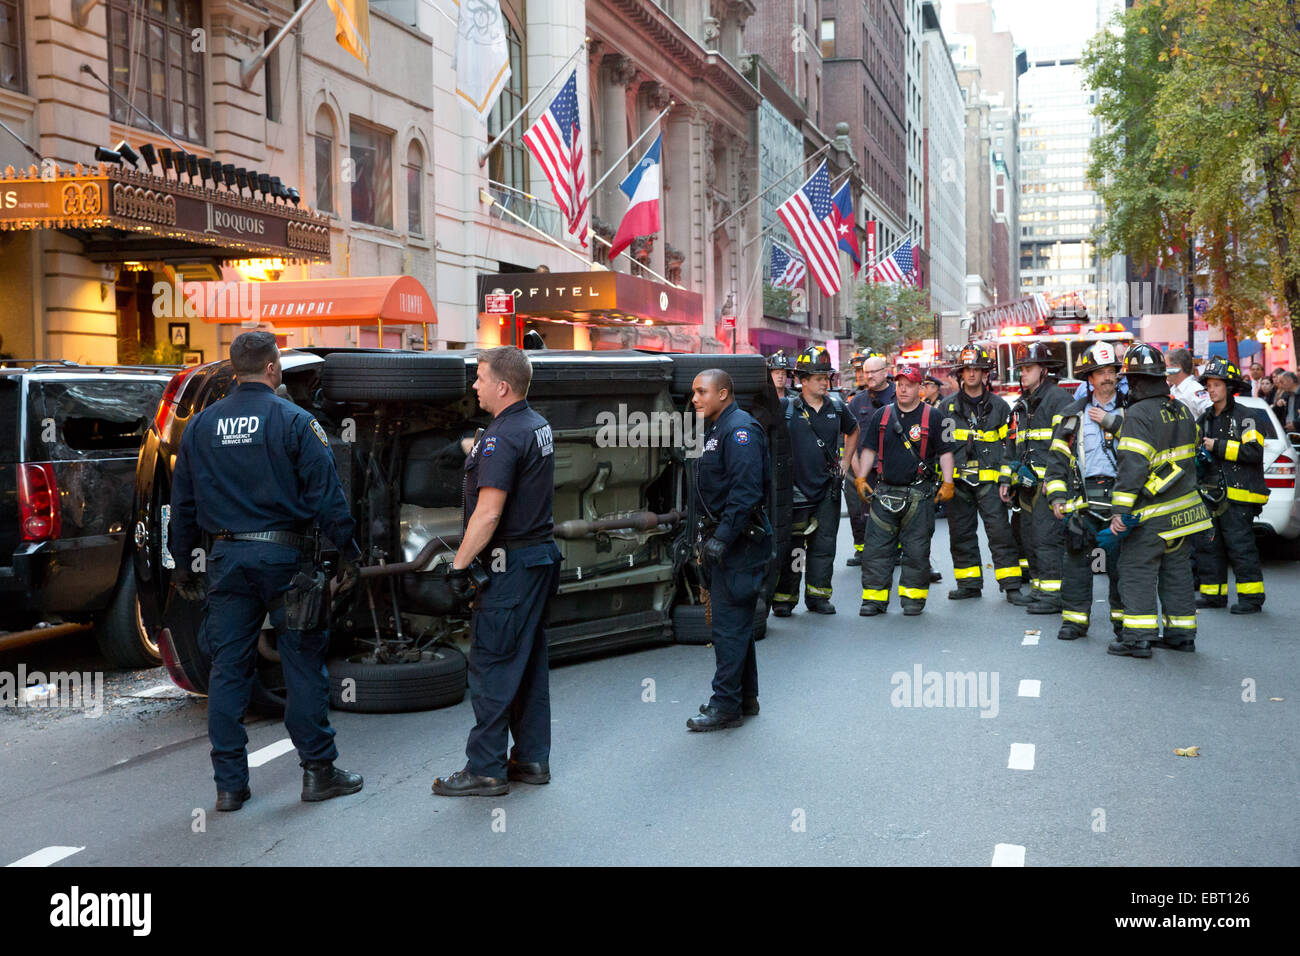 FDNY & NYPD on scene, rollover accident, W 44th St., Manhattan, Oct. 16, 2014. Stock Photo